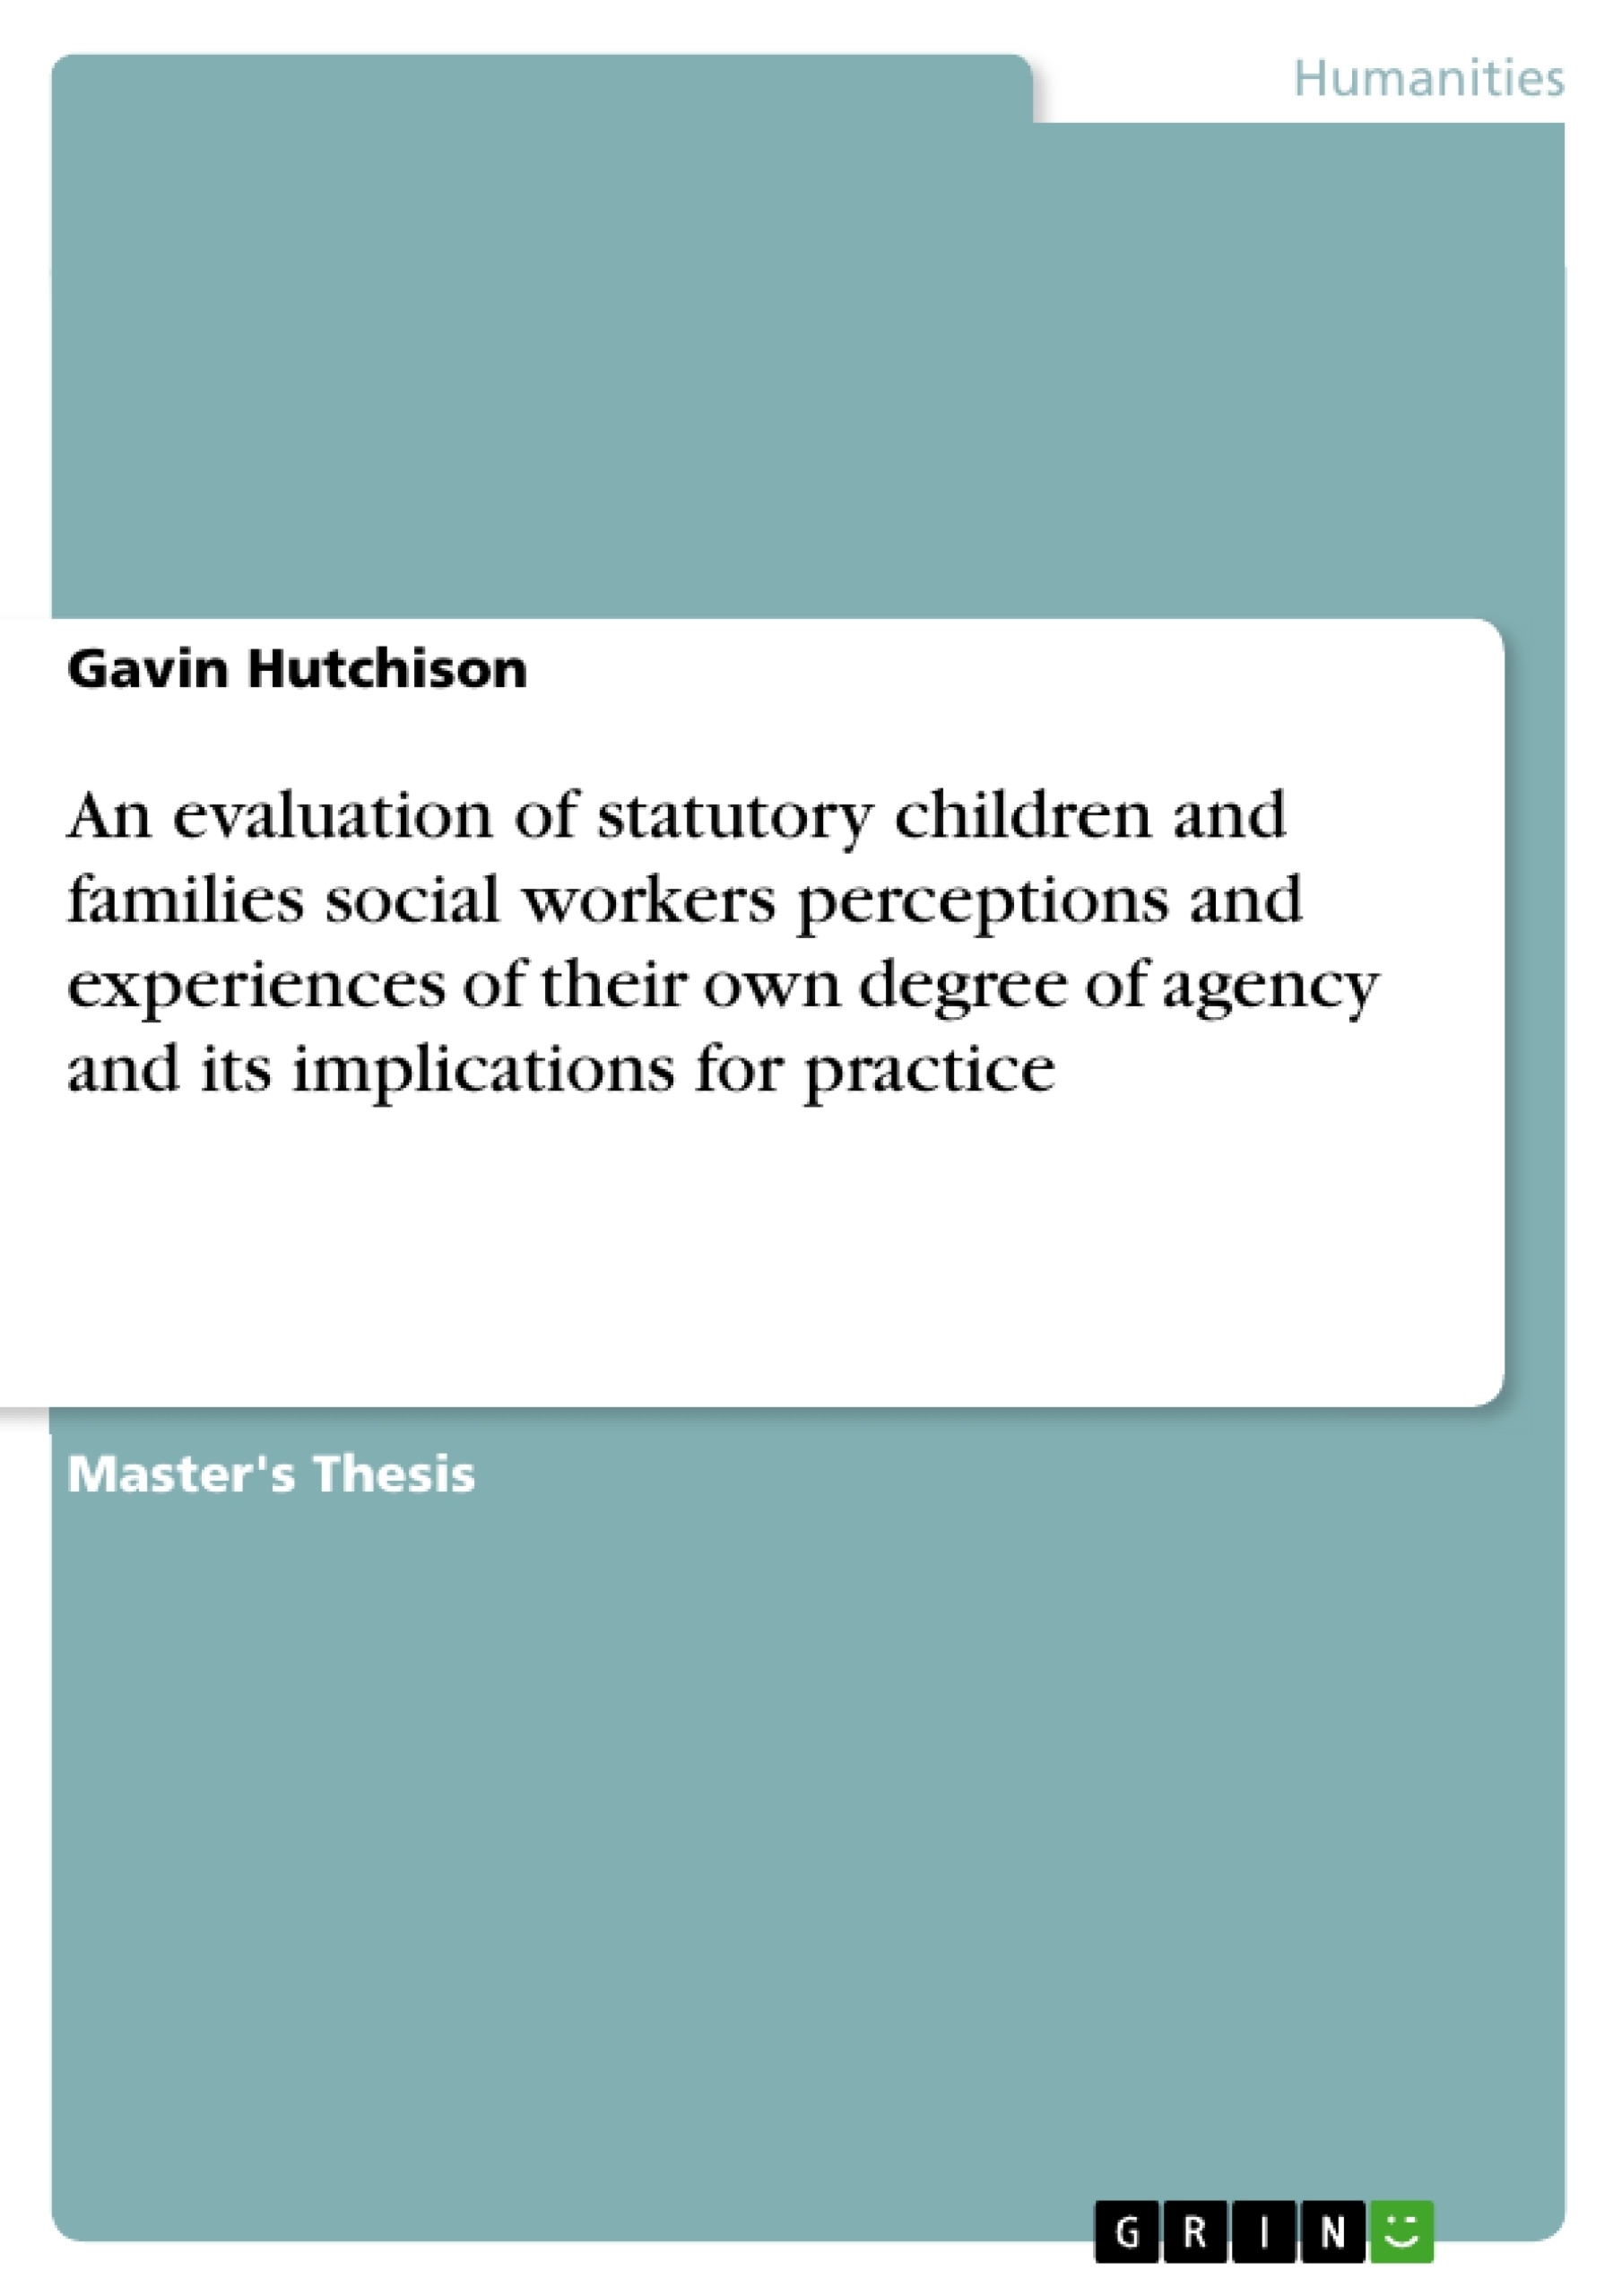 Title: An evaluation of statutory children and families social workers perceptions and experiences of their own degree of agency and its implications for practice